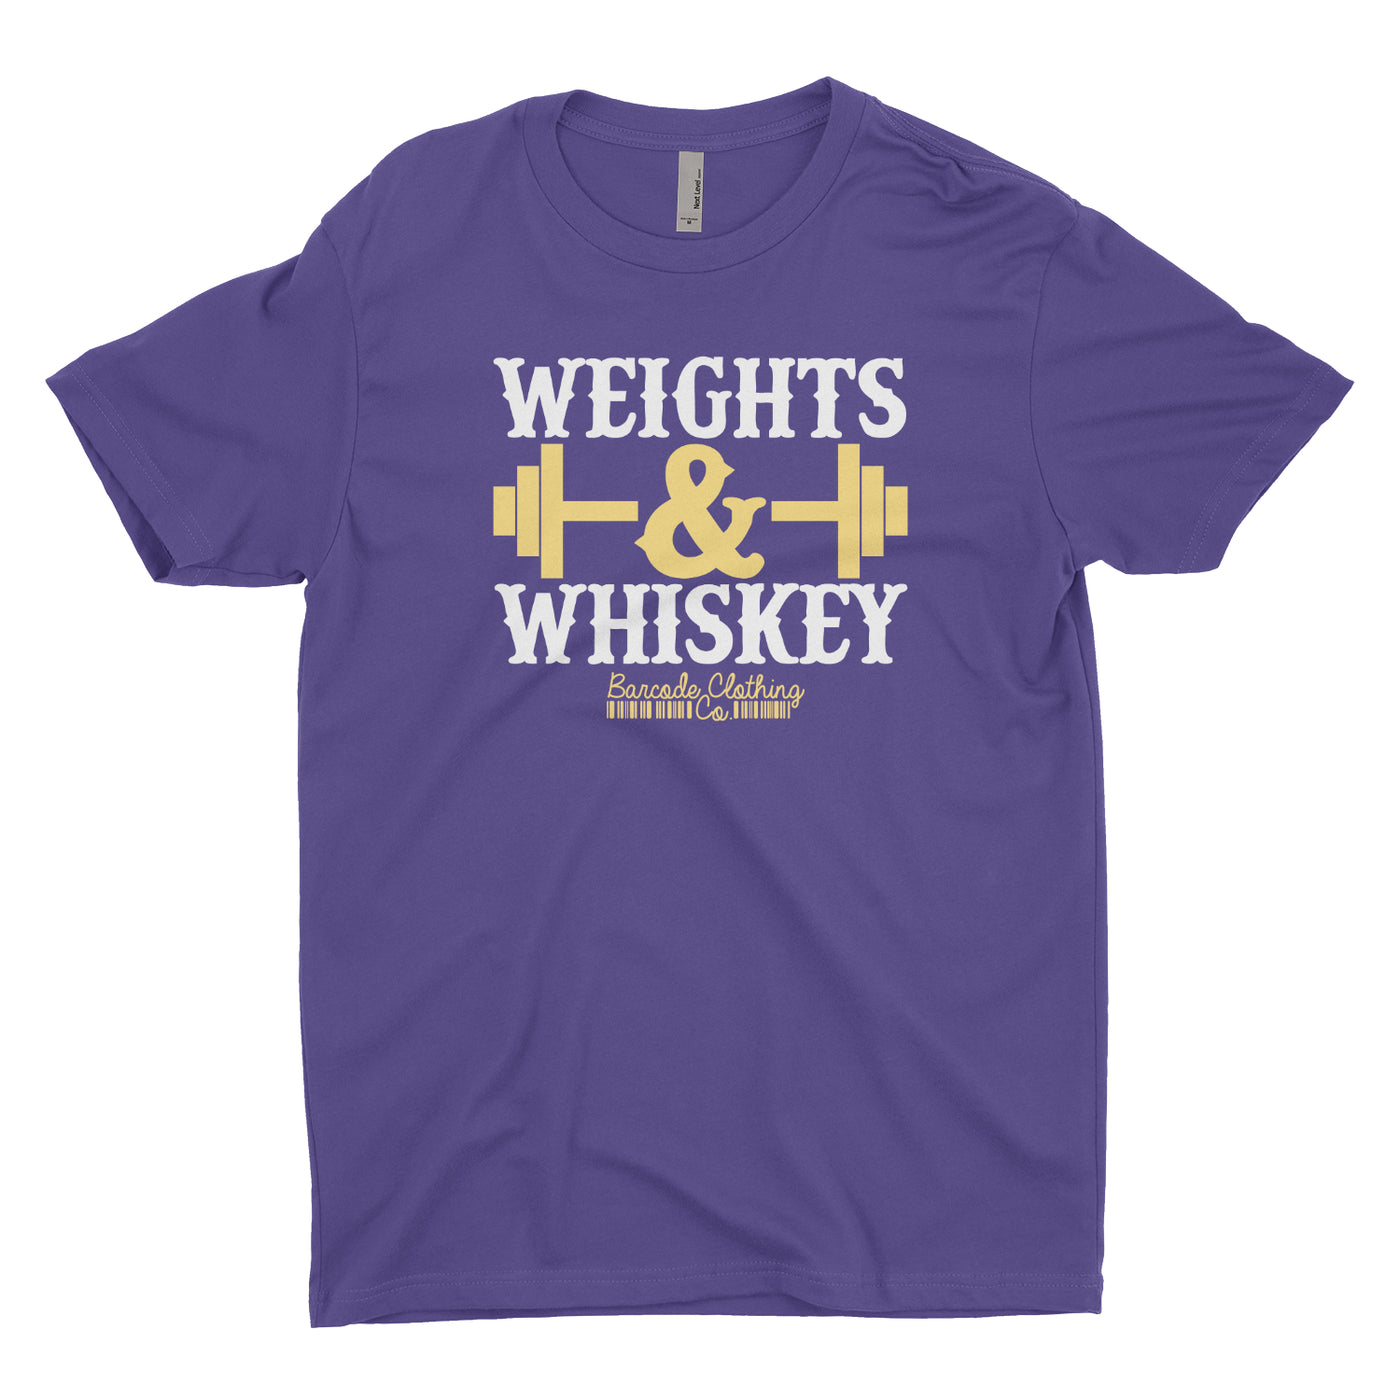 Weights & Whiskey